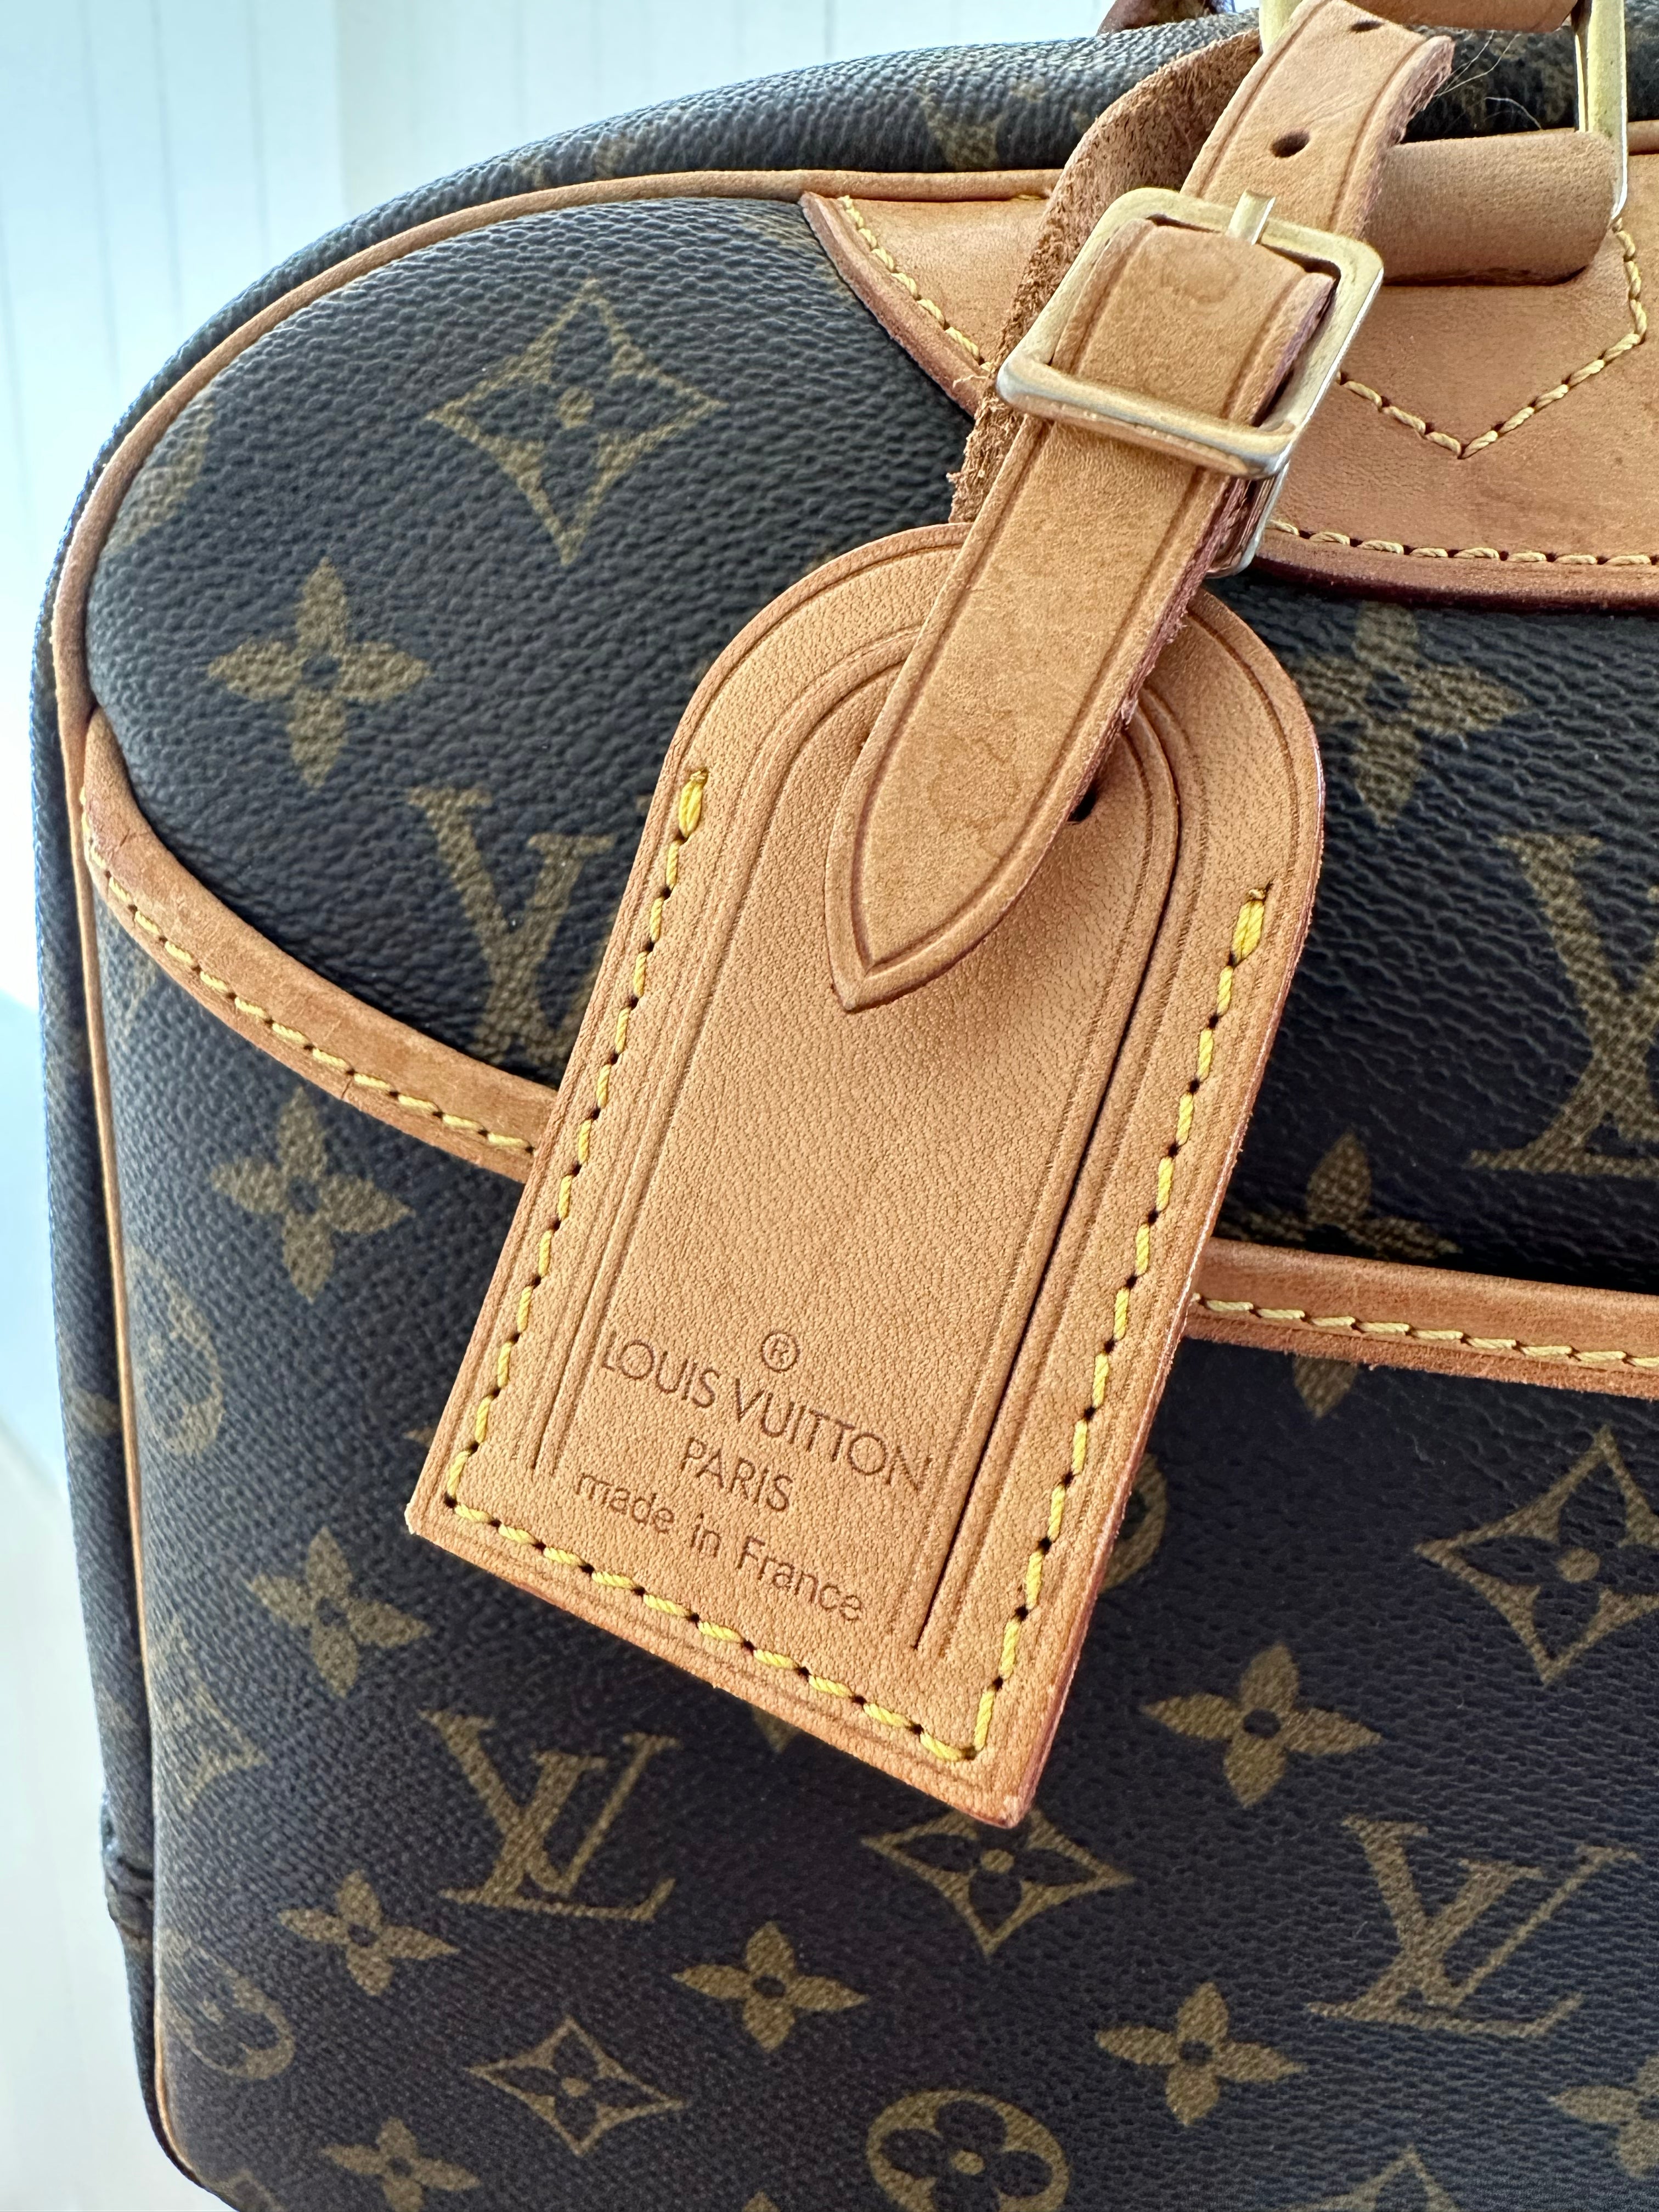 Authenticated Louis Vuitton Monogram Deauville With Luggage Tag Purse